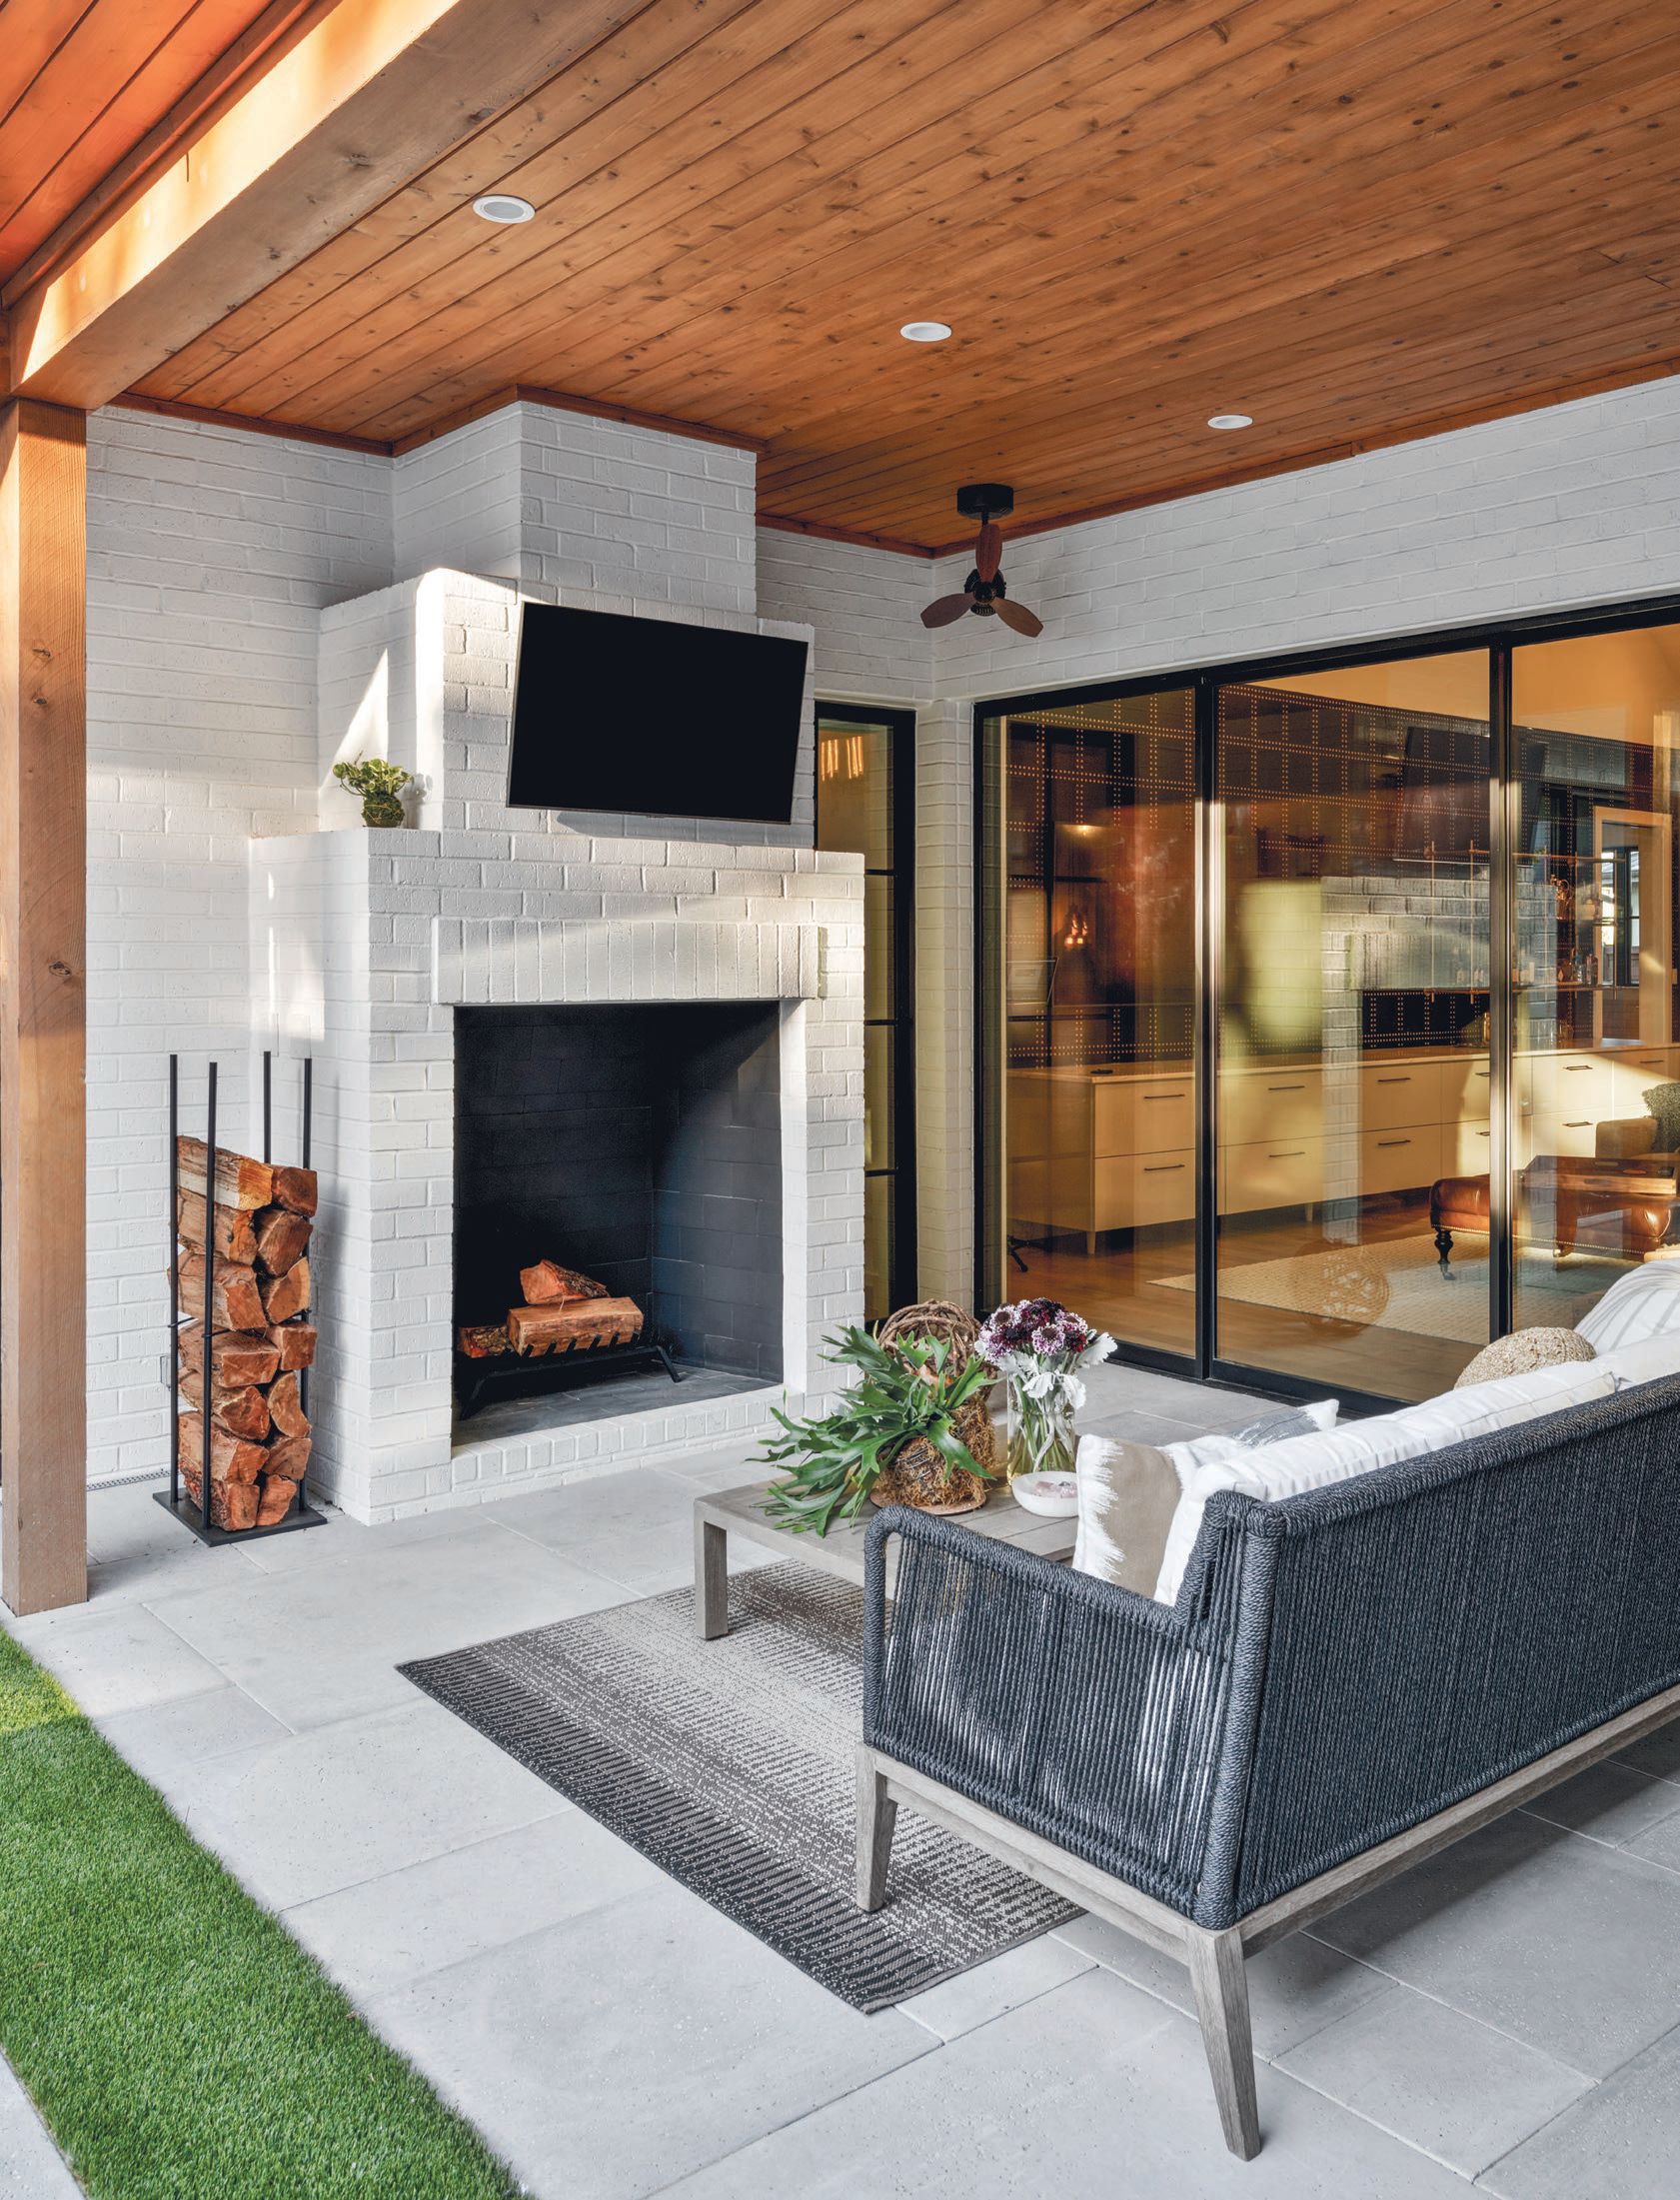 A sleek sitting area in the backyard. PHOTOGRAPHED BY BLAKE VERDOORN